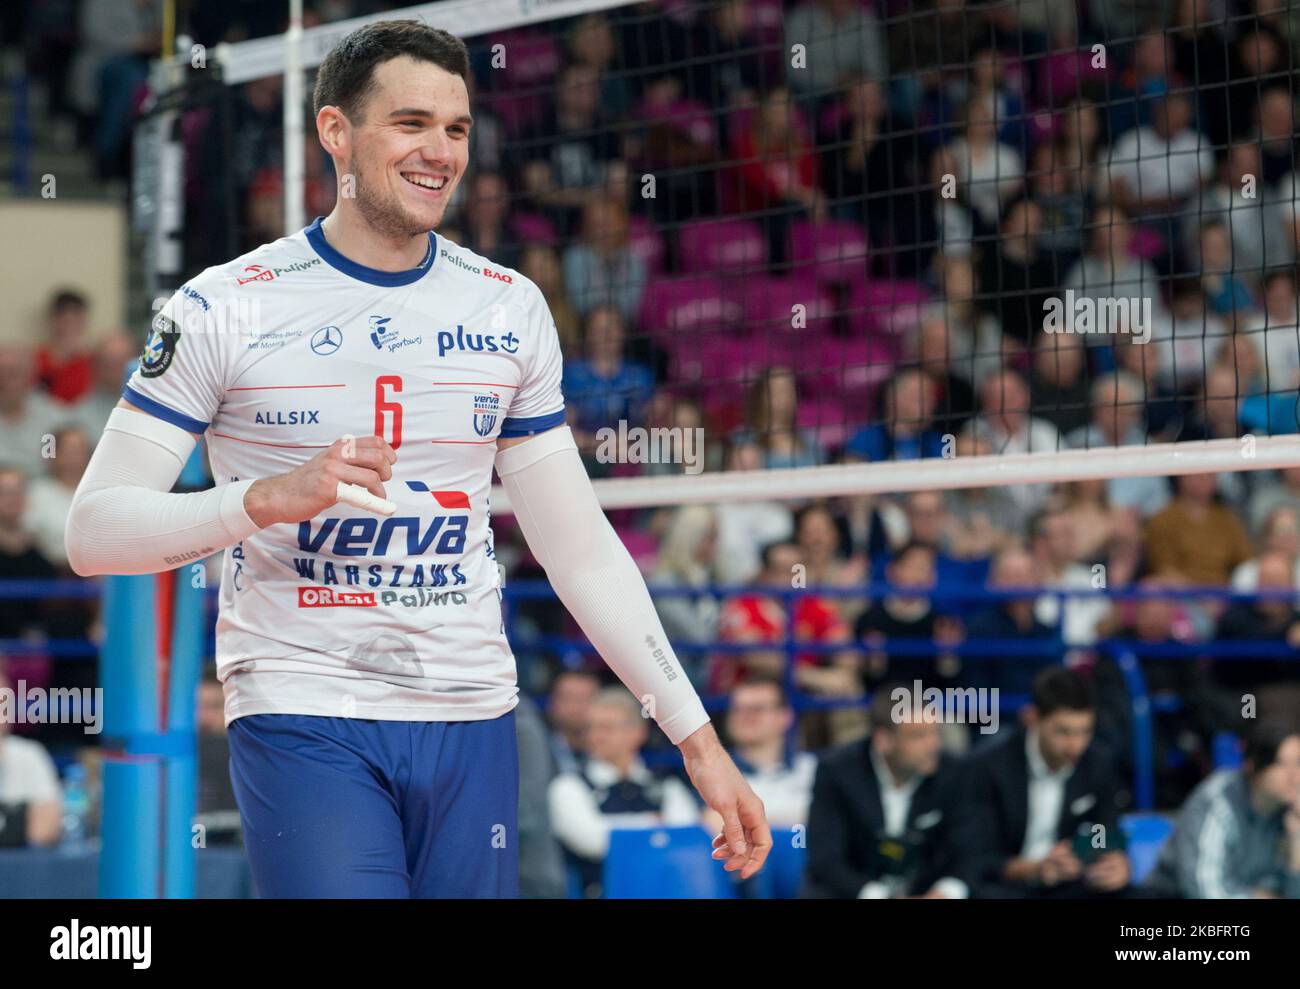 Antoine Brizard (Verva) during the EV Champions League Volley 2020 match between Verva Warszawa and Benfica Lisbona, in Warsaw, Poland, on January 29, 2029. (Photo by Foto Olimpik/NurPhoto) Stock Photo